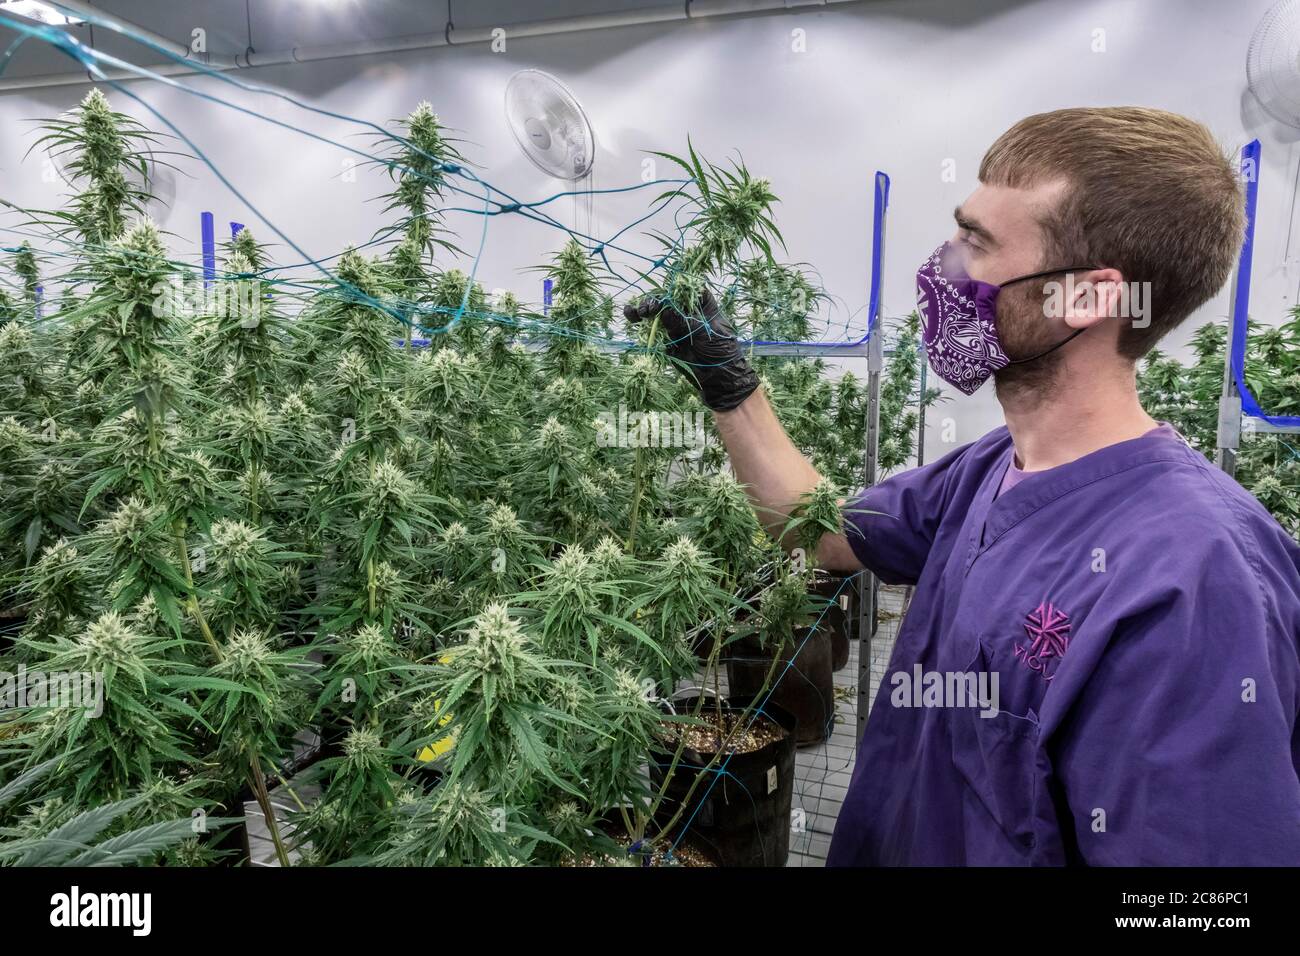 Detroit, Michigan - A worker examines cannabis plants growing at Viola Brands, a company founded by NBA veteran Al Harrington. Michigan residents vote Stock Photo